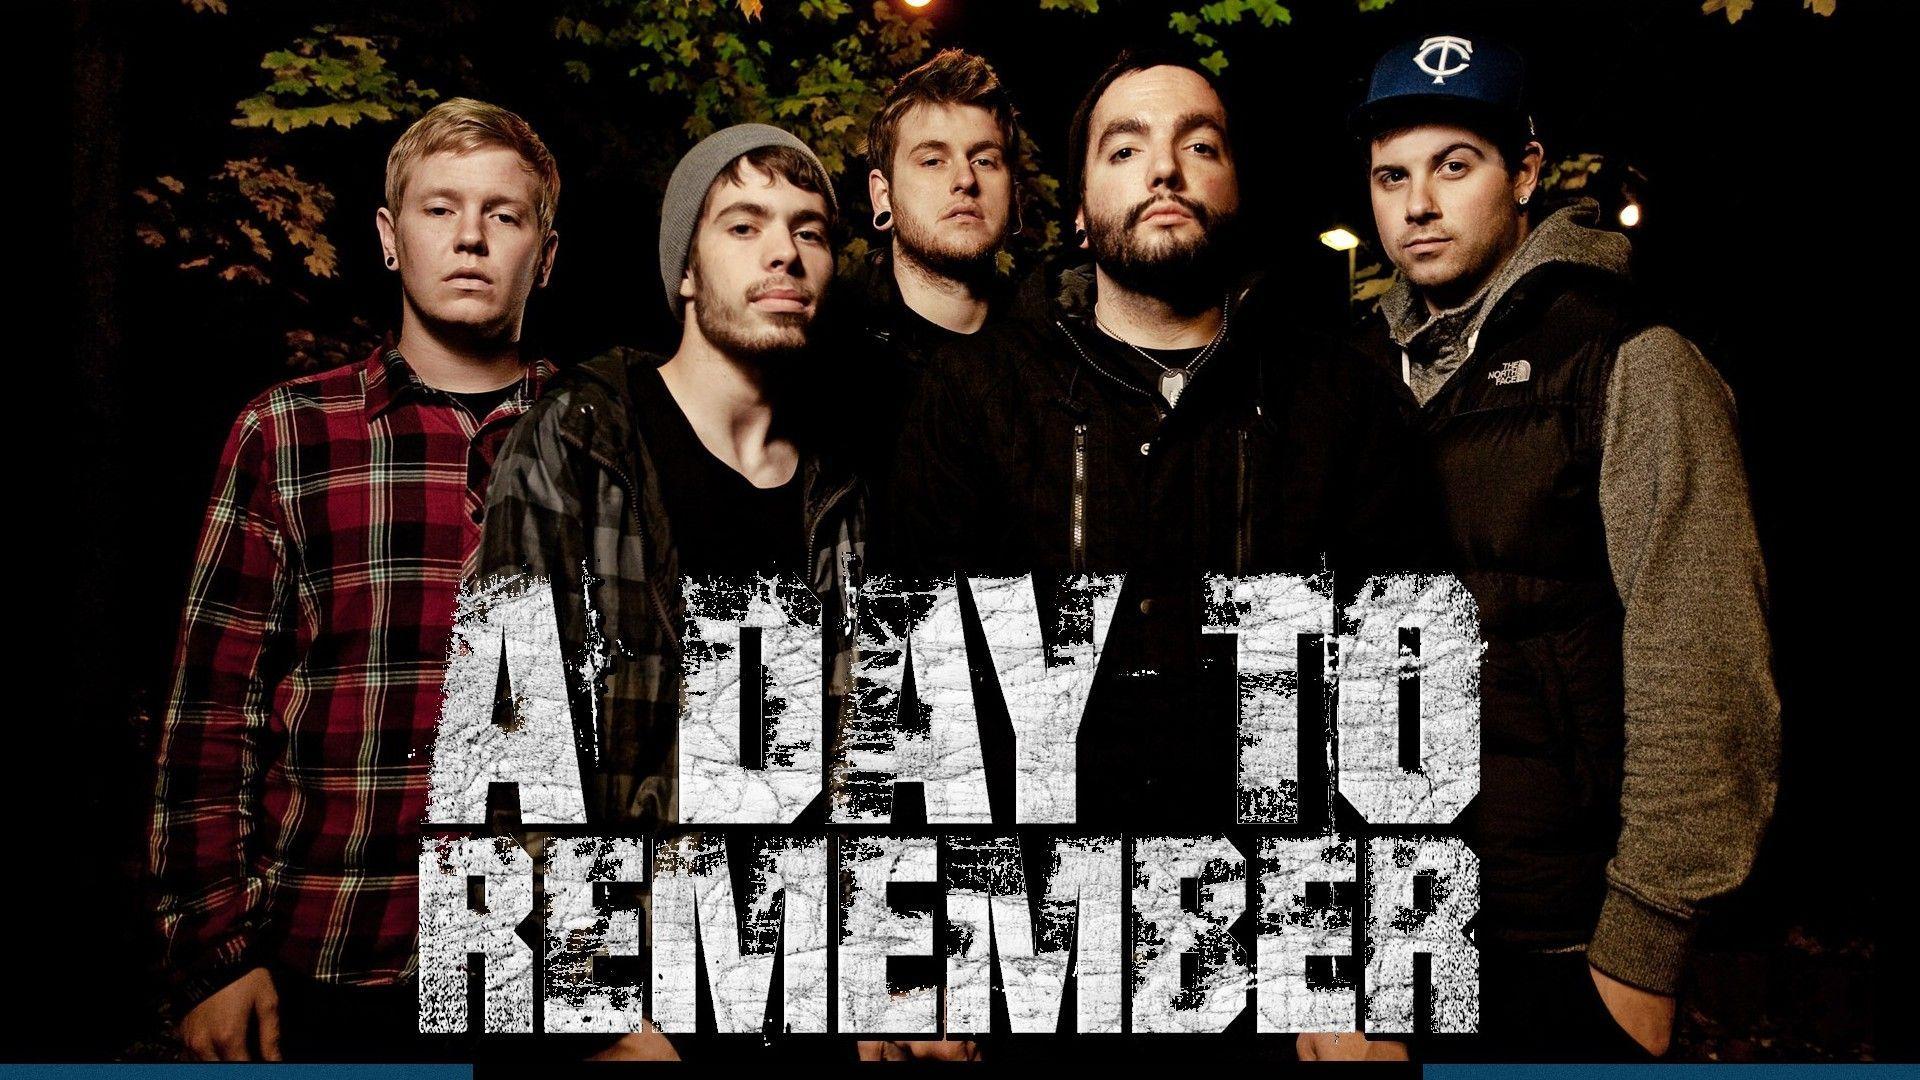 A Day To Remember image ADTR wallpaper and background photo 1680